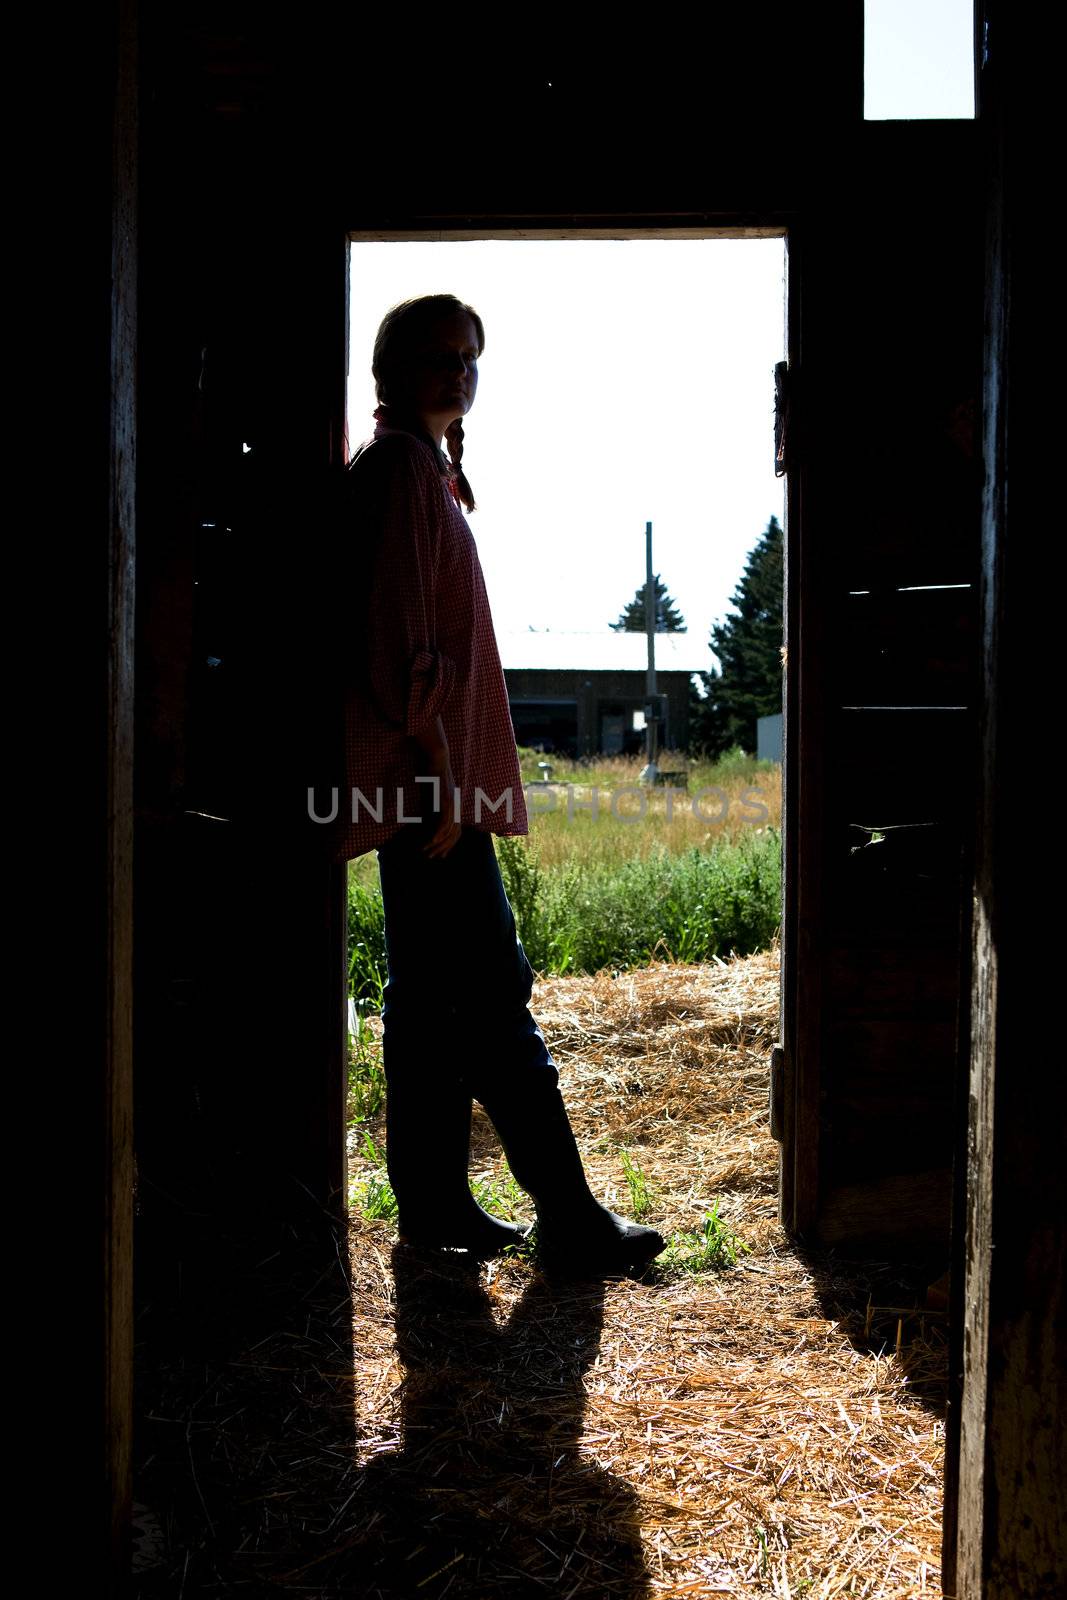 A farm girl standing in a doorway of a barn